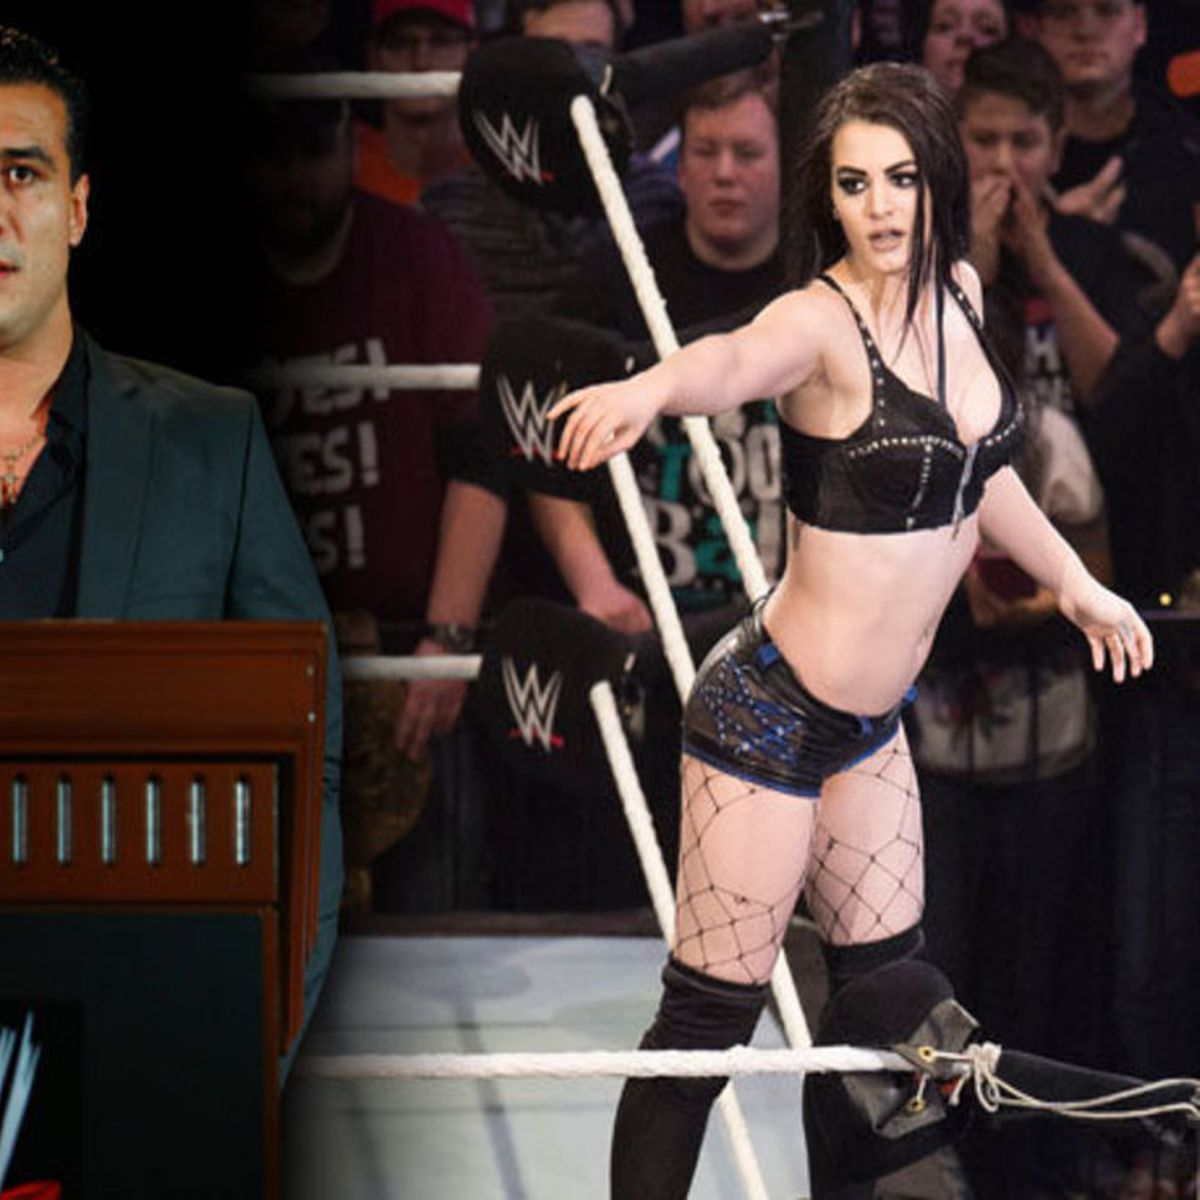 barbara nethery recommends paige wwe wardrobe malfunction pic